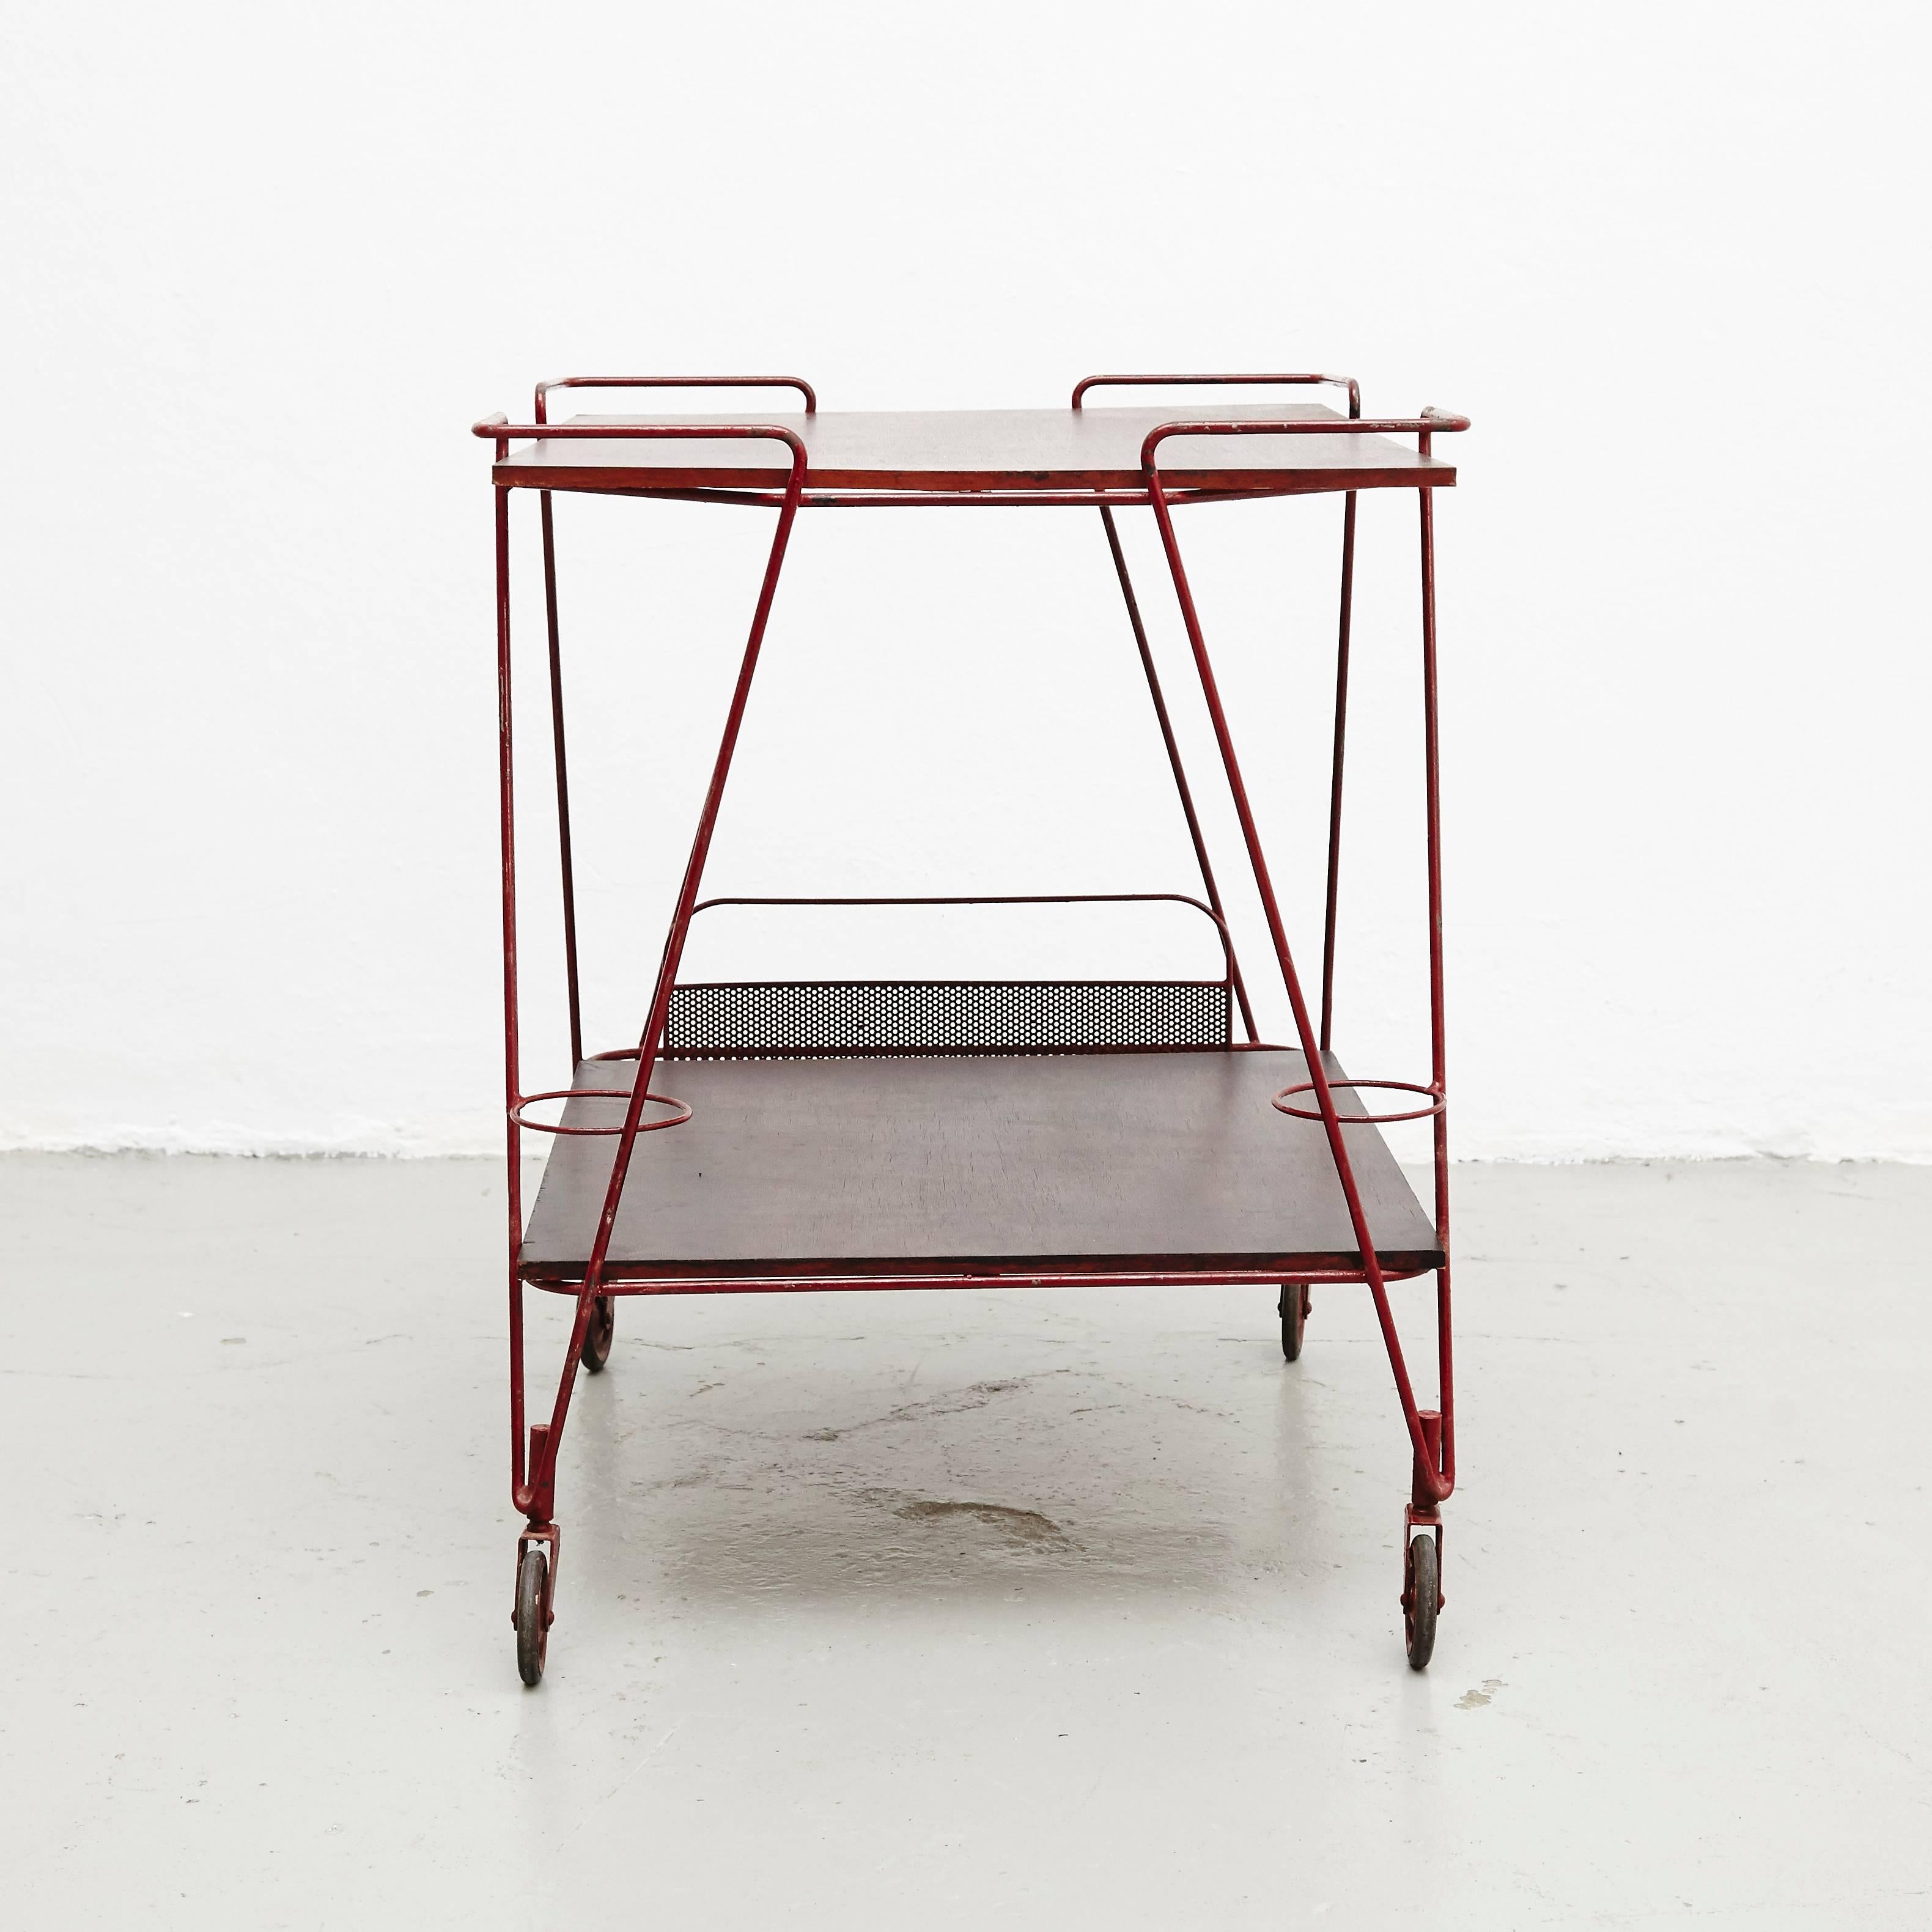 Trolley designed by Mathieu Matégot.
Manufactured by Ateliers Matégot (France), circa 1950.
Perforated metal lacquered in red and laminated wood.

In good original condition, with minor wear consistent with age and use, preserving a beautiful